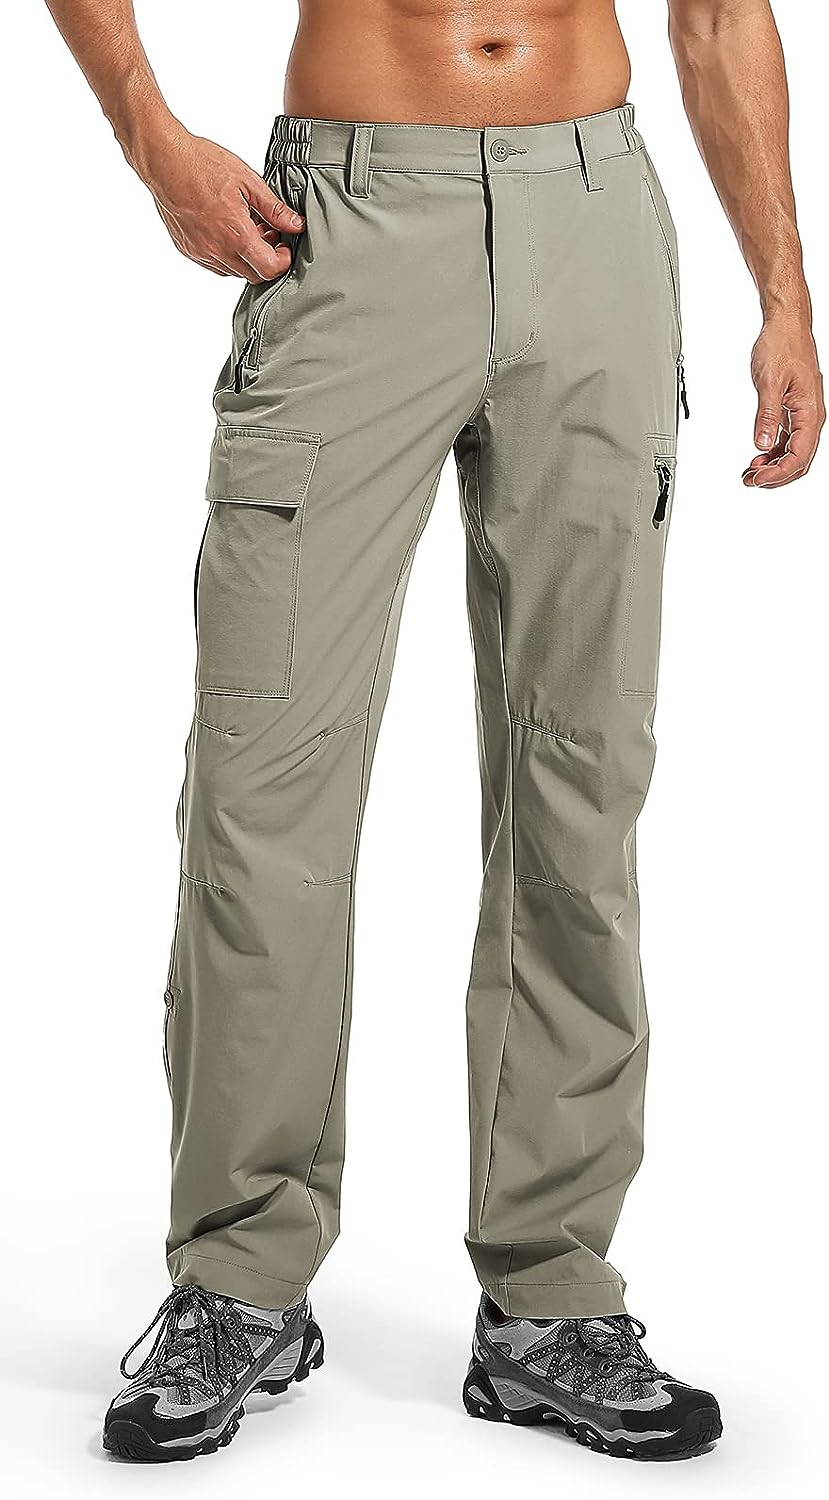 Men's Hiking Cargo Pants Lightweight Quick Dry Waterproof Fishing Pants for Tactical Outdoor Hunting Camping